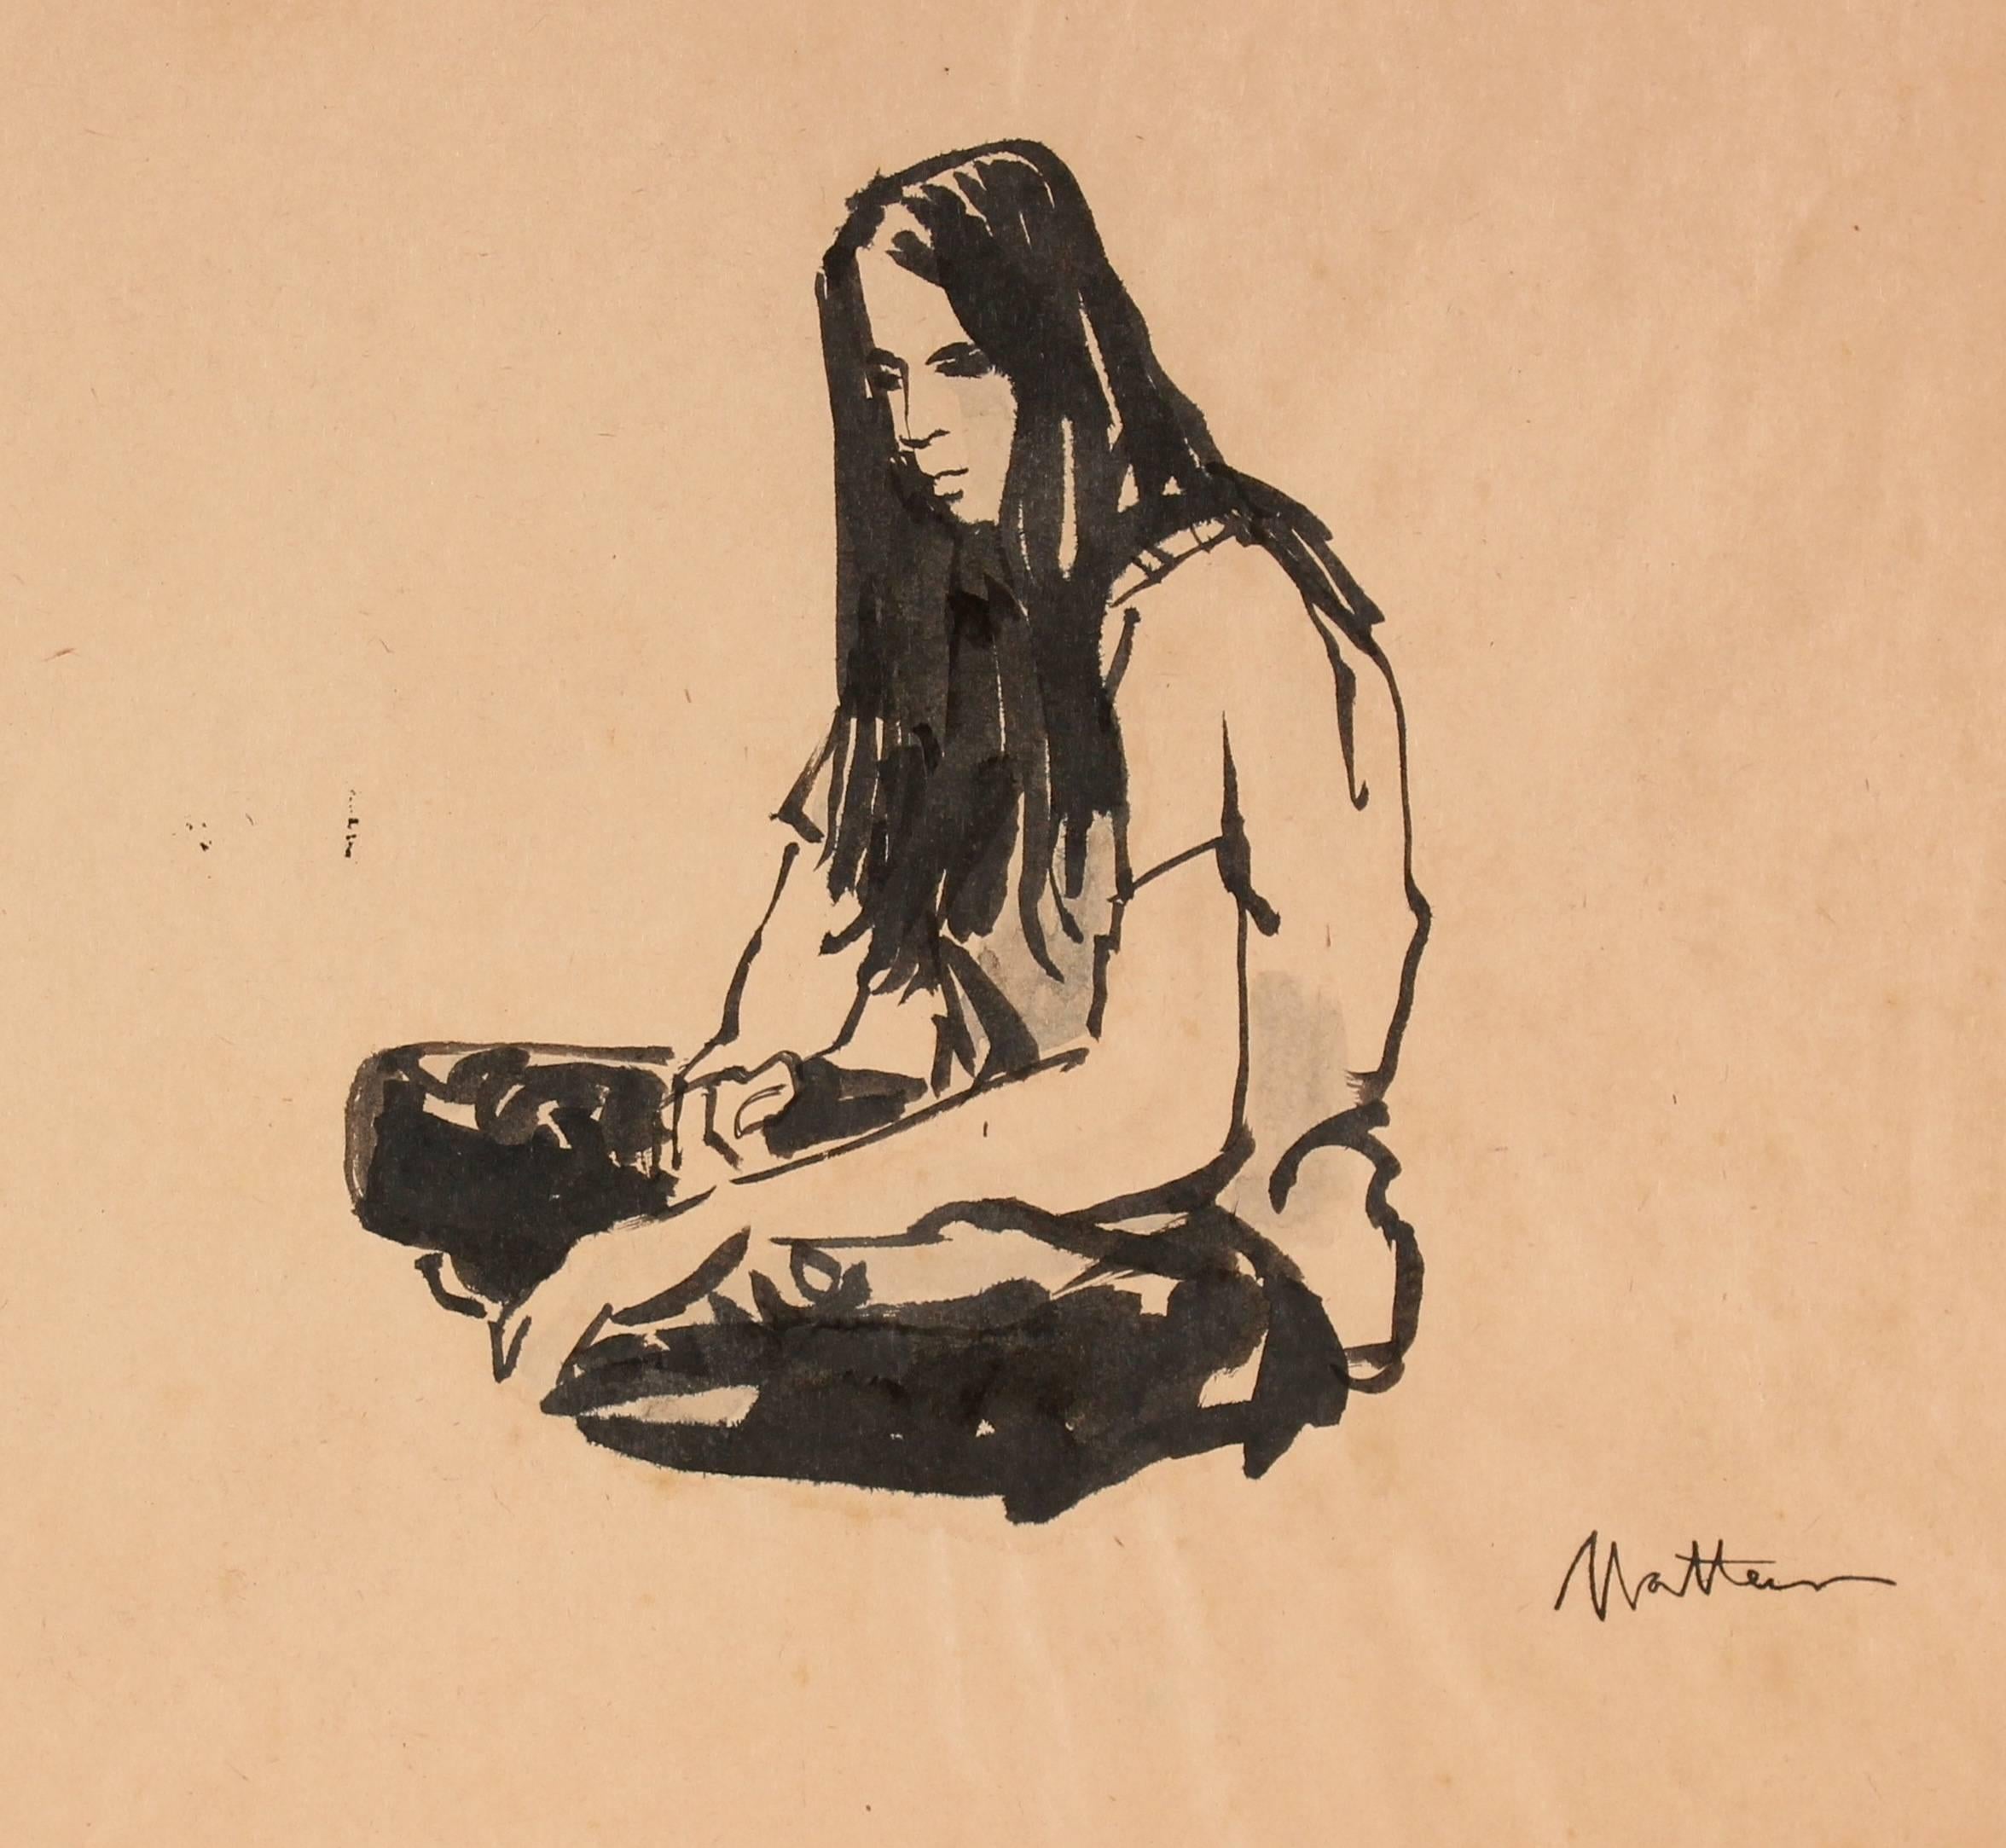 Seated Hippie Woman, Ink on Paper Portrait, Circa 1970s - Art by Rip Matteson